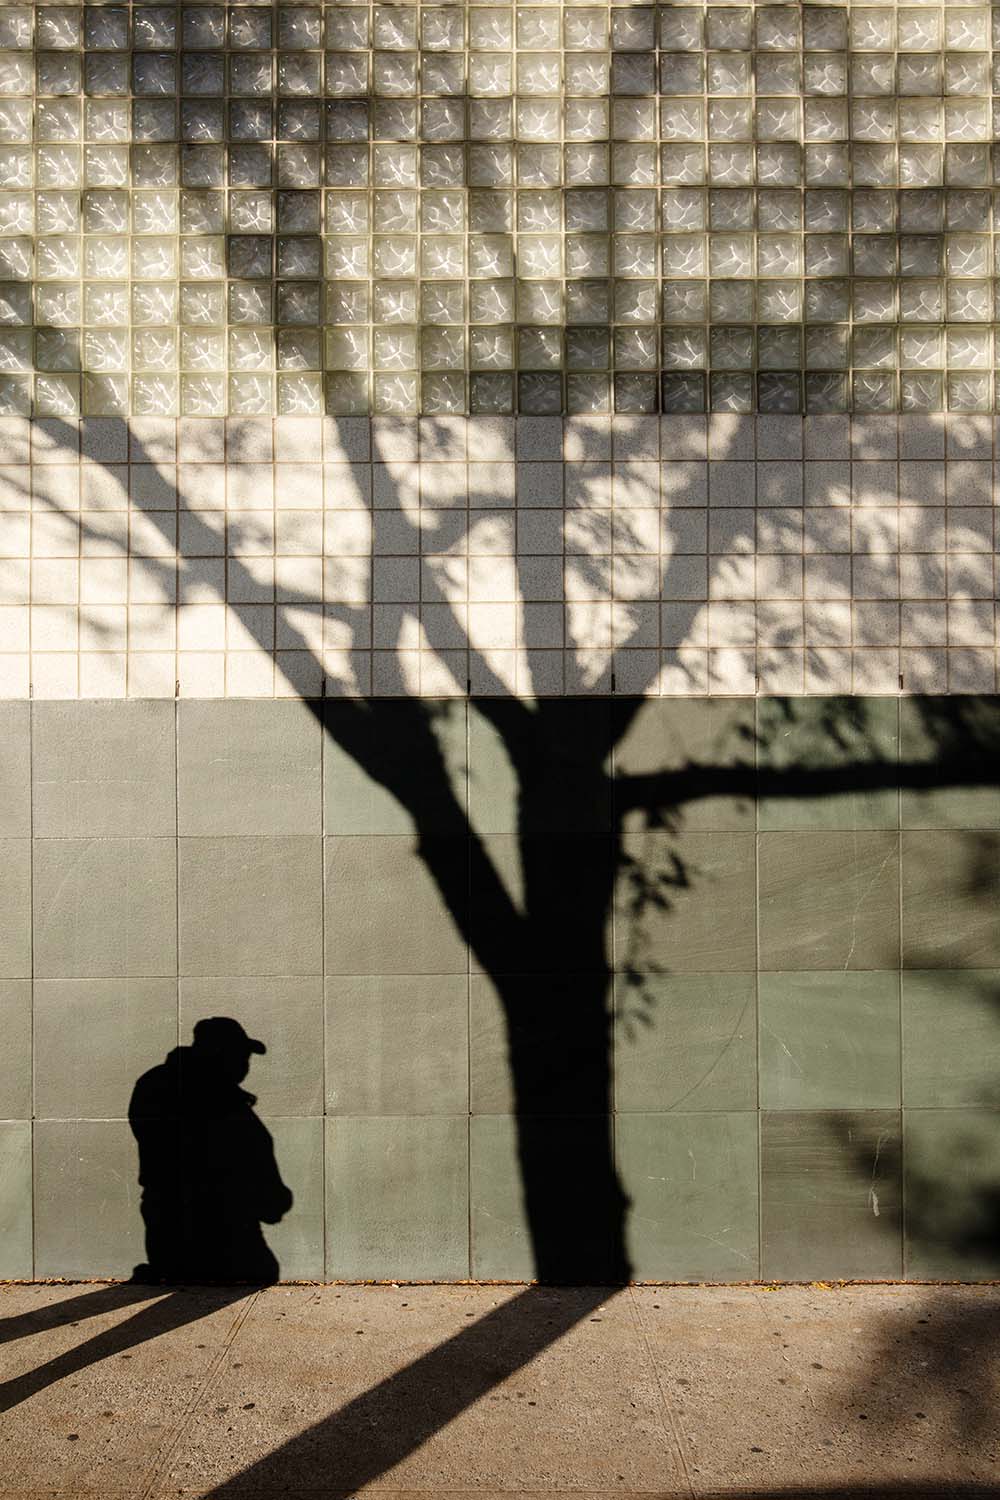 Shadow of a Man and a Honey Locust, Norwood, Bronx, from Tree Love series, 2020.